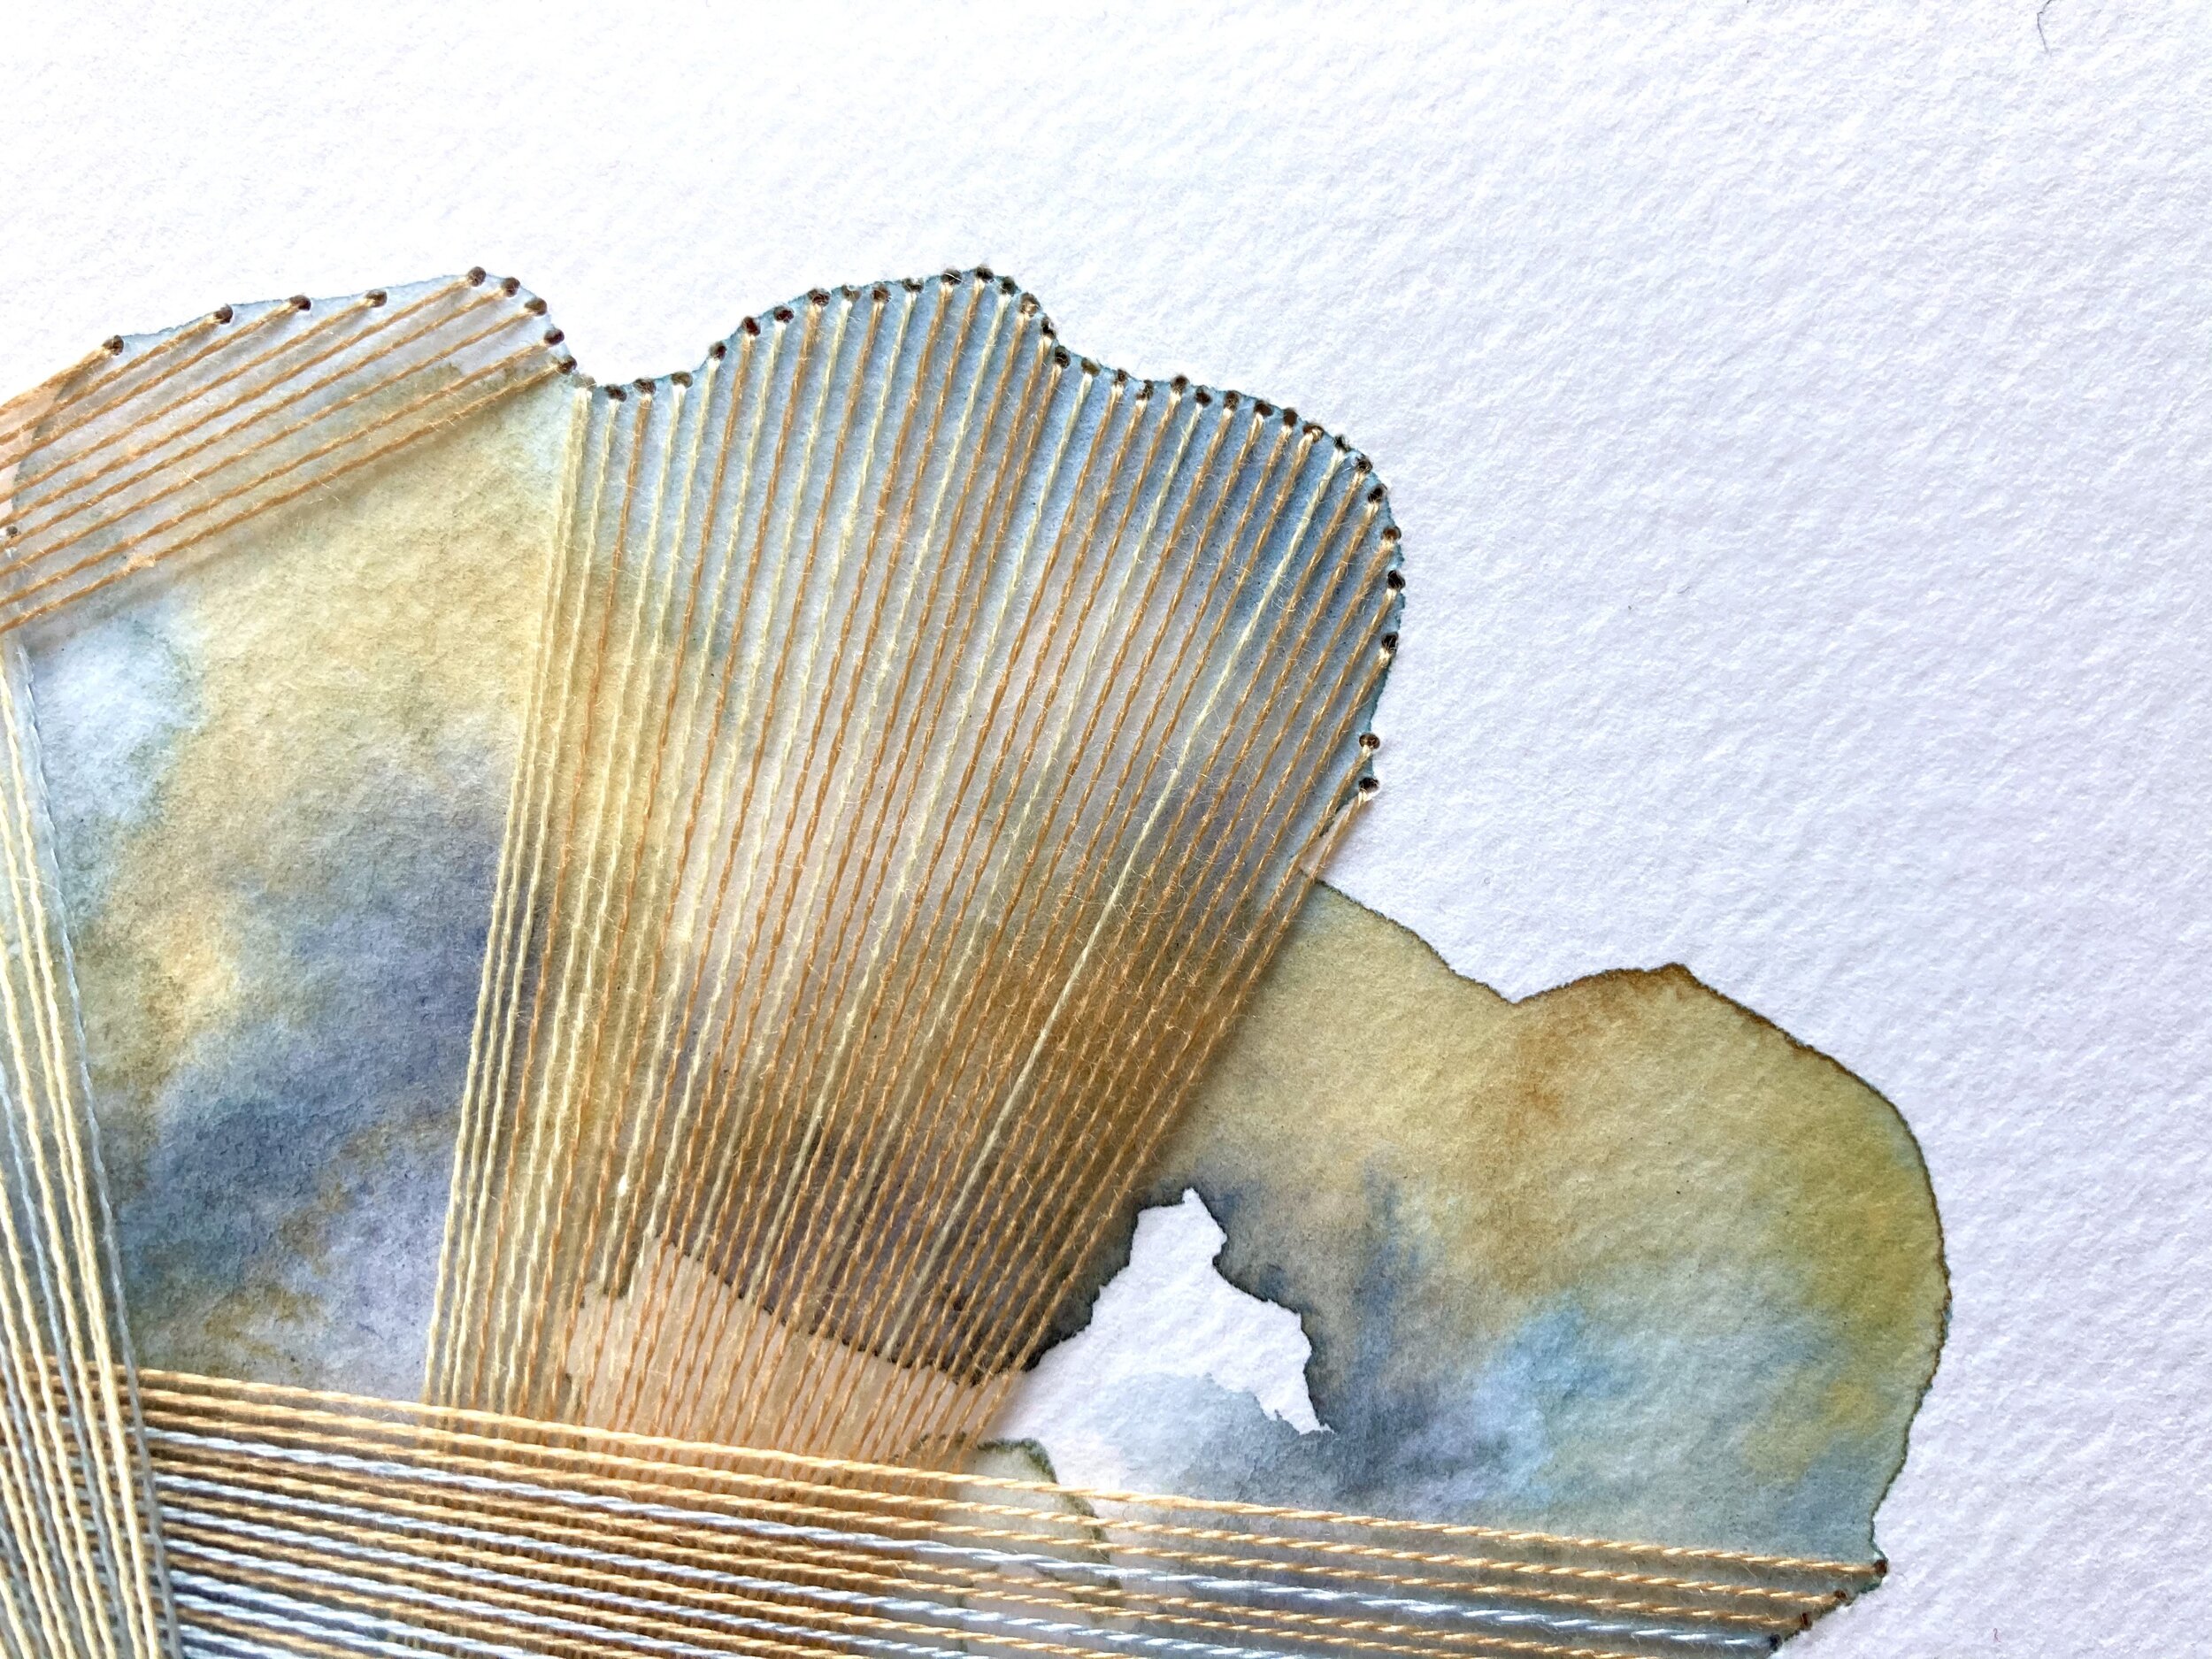 Watercolor and Embroidery in Kansas Sky--detail 1